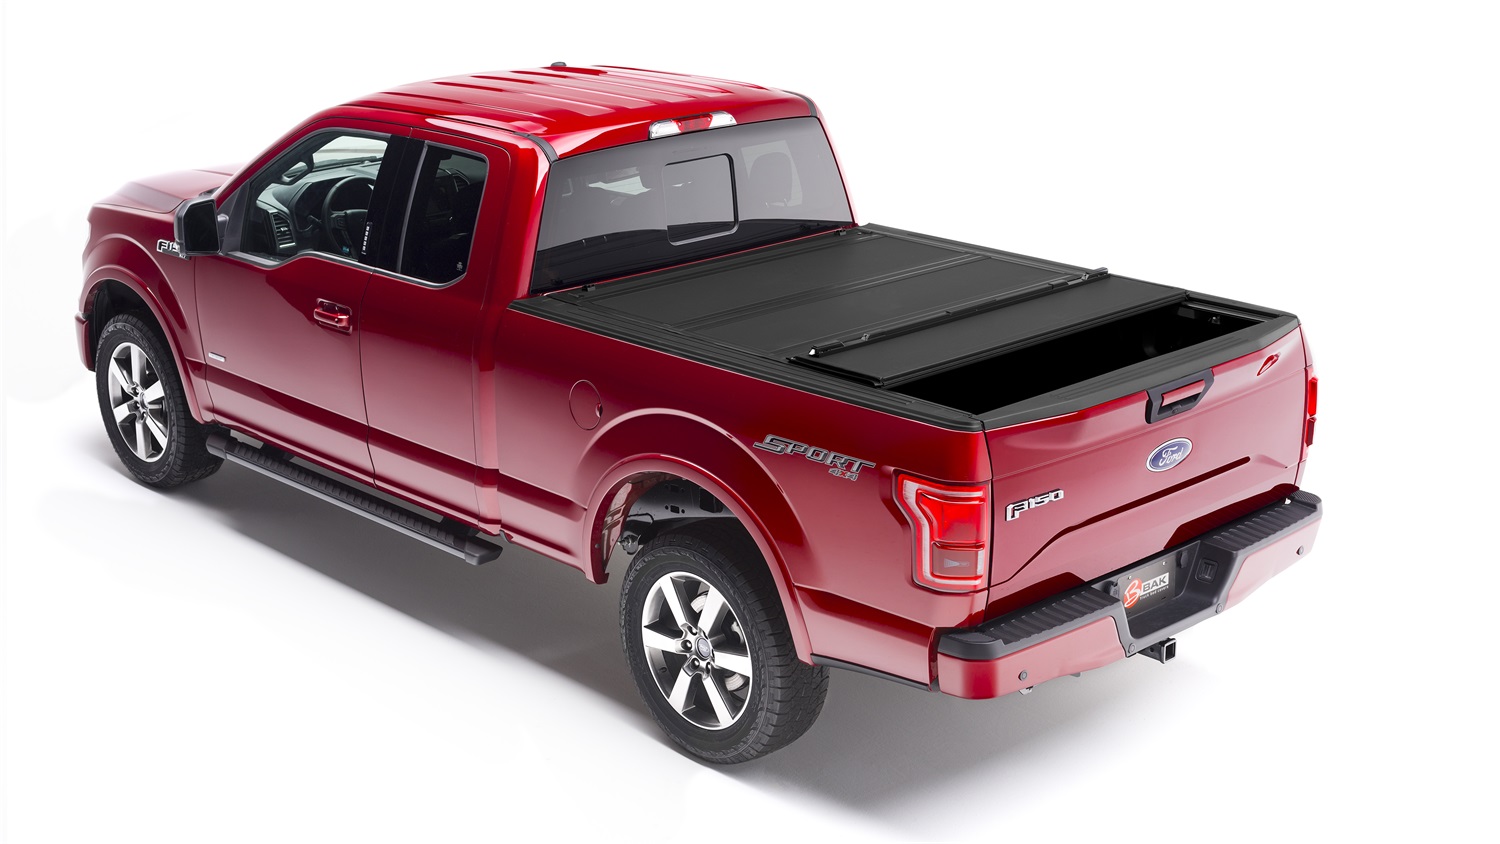 BAKFlip MX4 Hard Folding Truck Bed Cover - 2004-2014 Ford F-150 5' 7" Bed without Cargo Management System - 448309